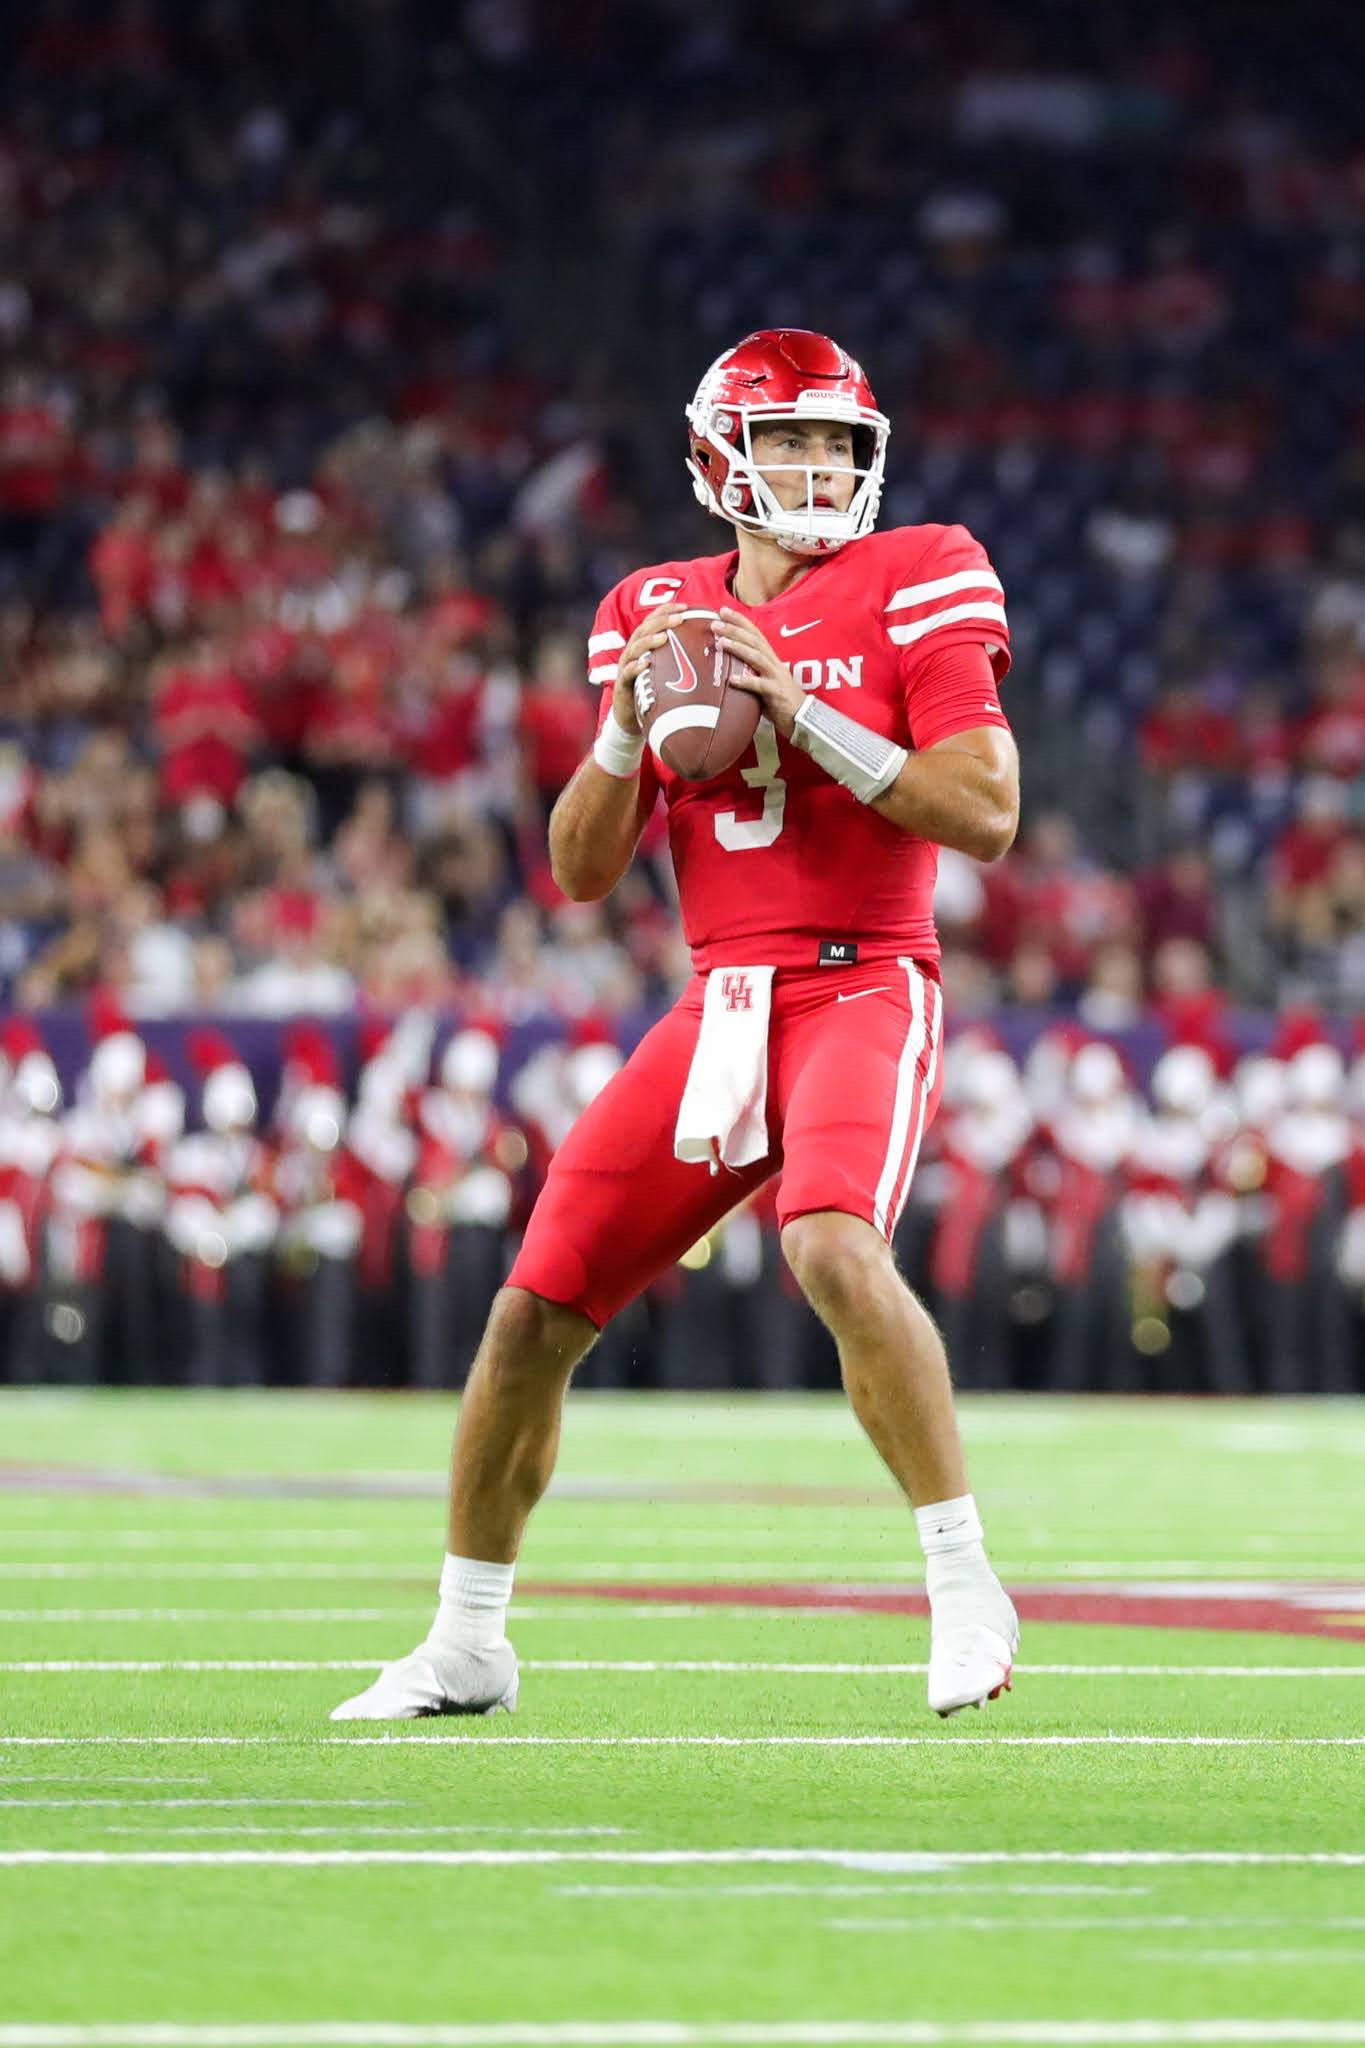 Houston Cougars quarterback Clayton Tune finished with 174 passing yards, two touchdowns and four interceptions in Saturday's loss to Texas Tech. (Courtesy Mario Puente)